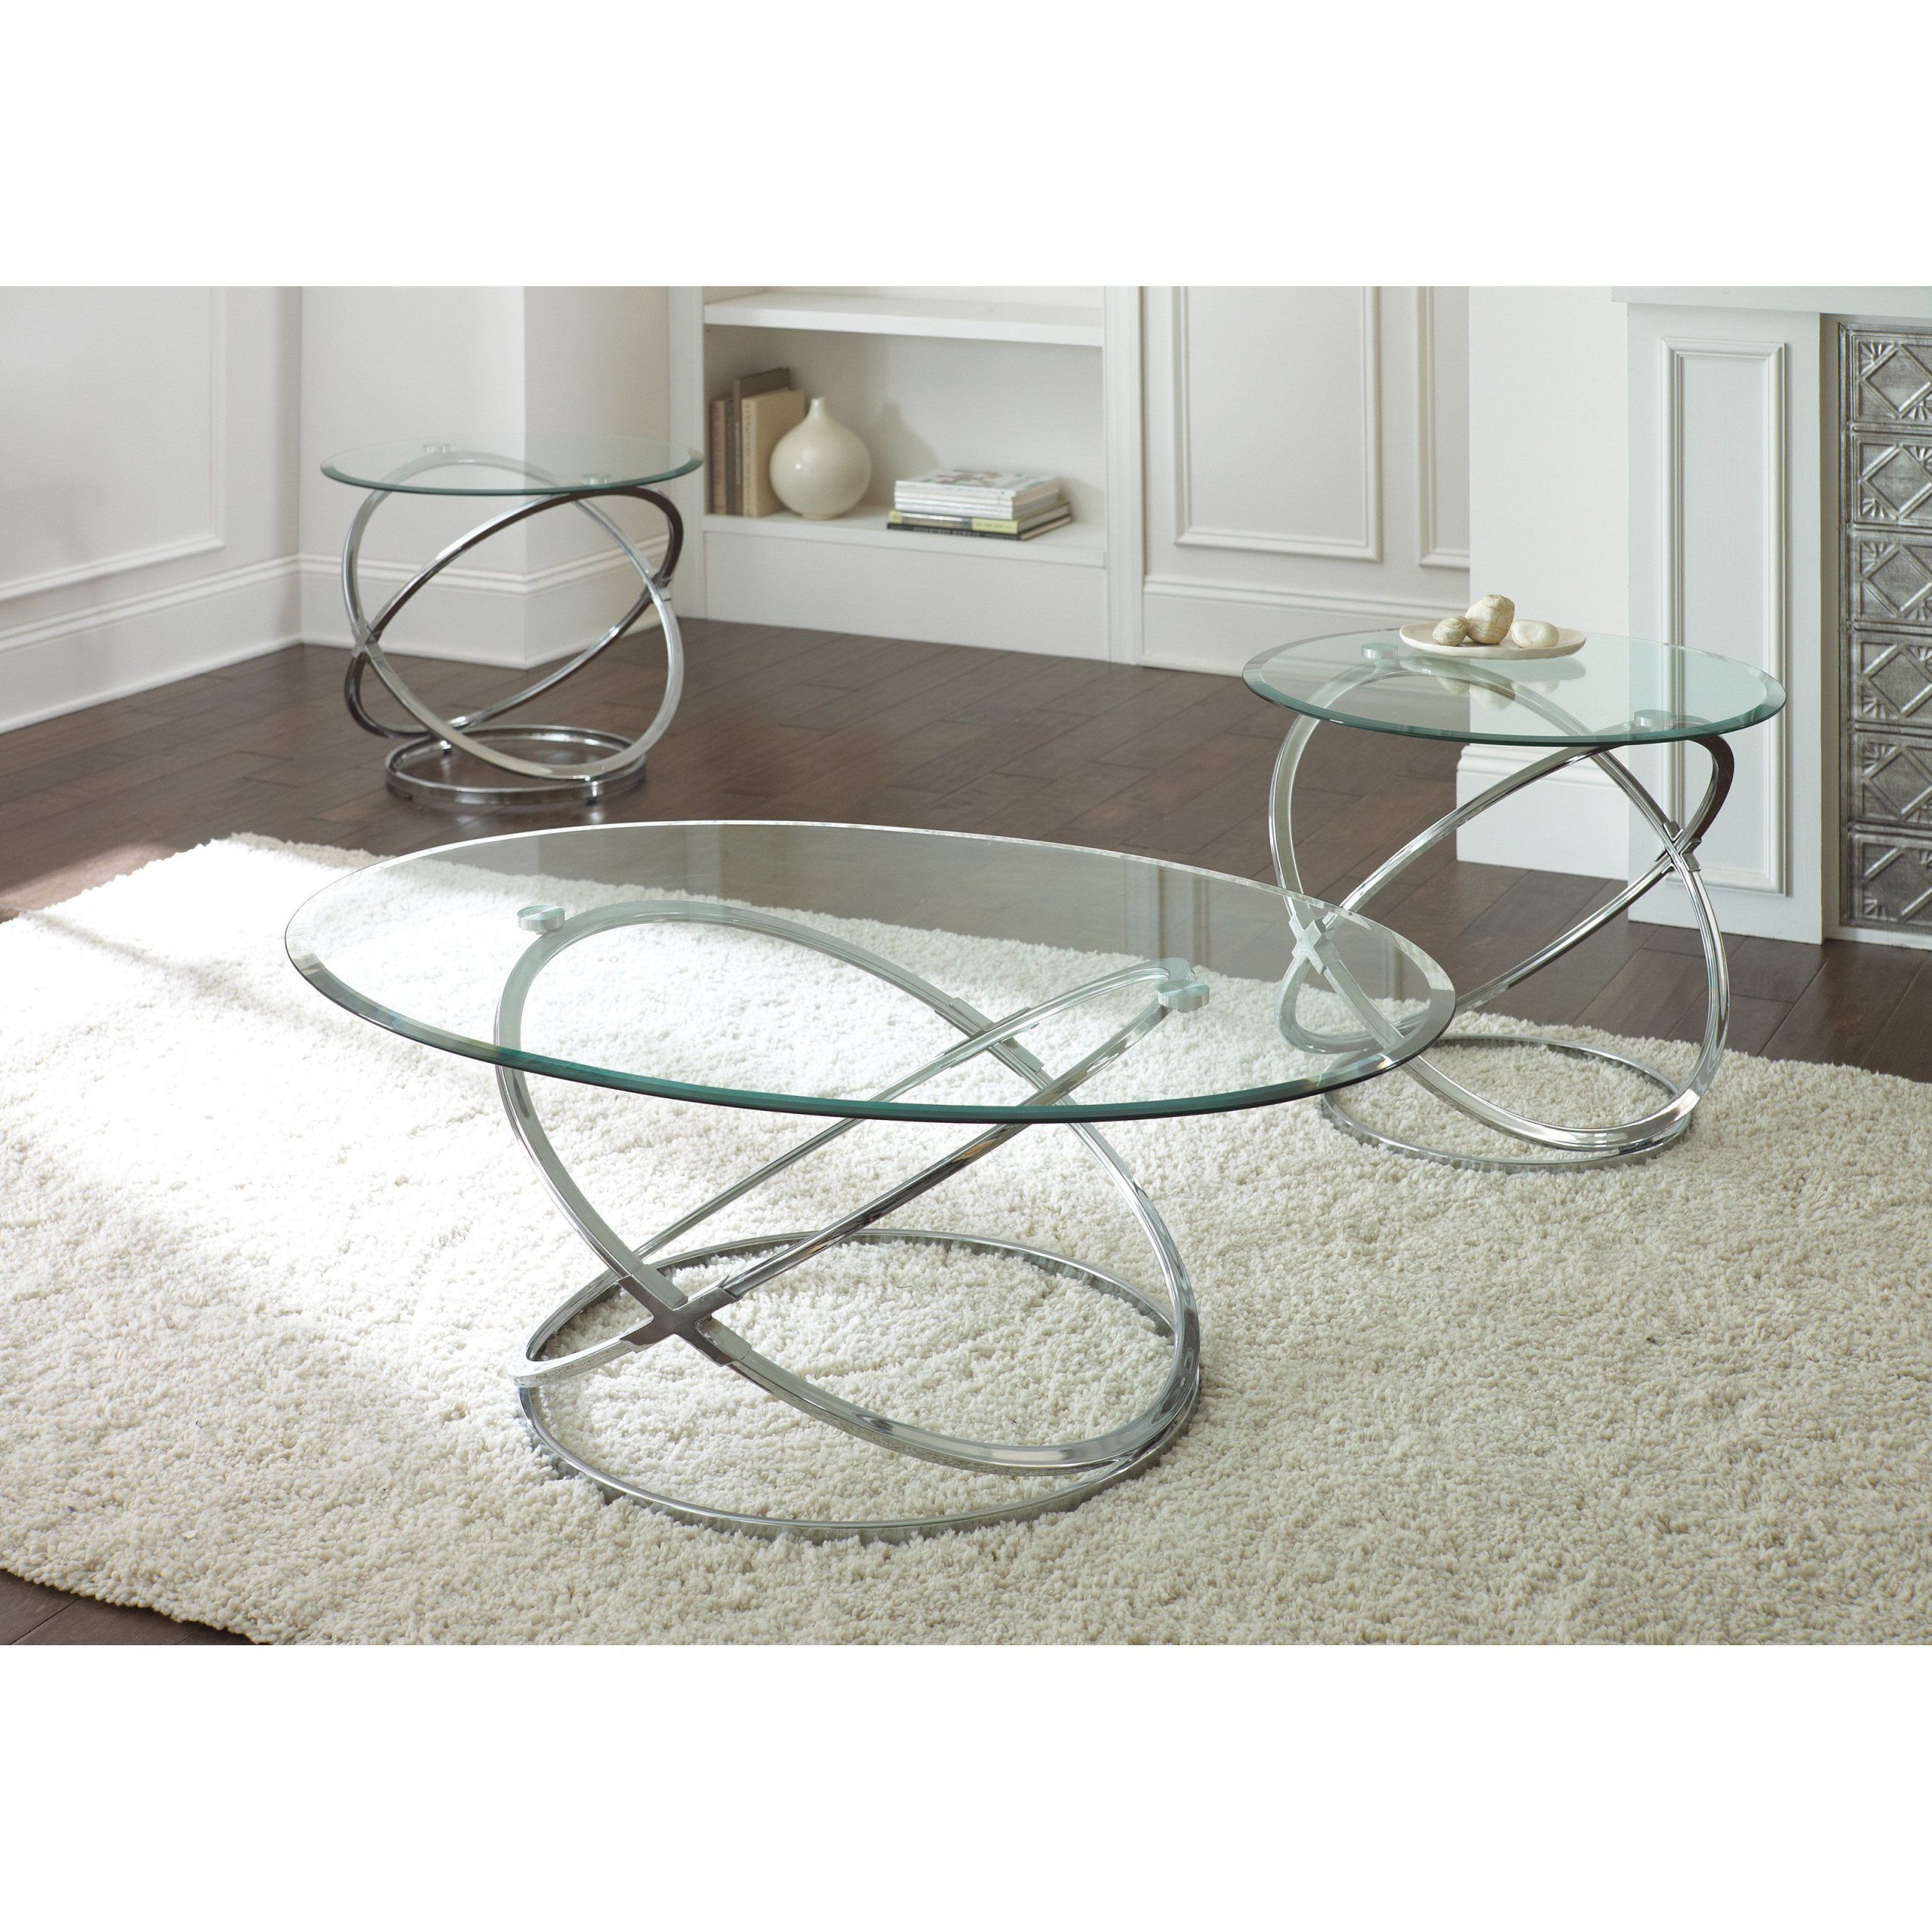 2020 Metallic Gold Modern Cocktail Tables For Steve Silver Orion Oval Chrome And Glass Coffee Table Set (Gallery 10 of 20)